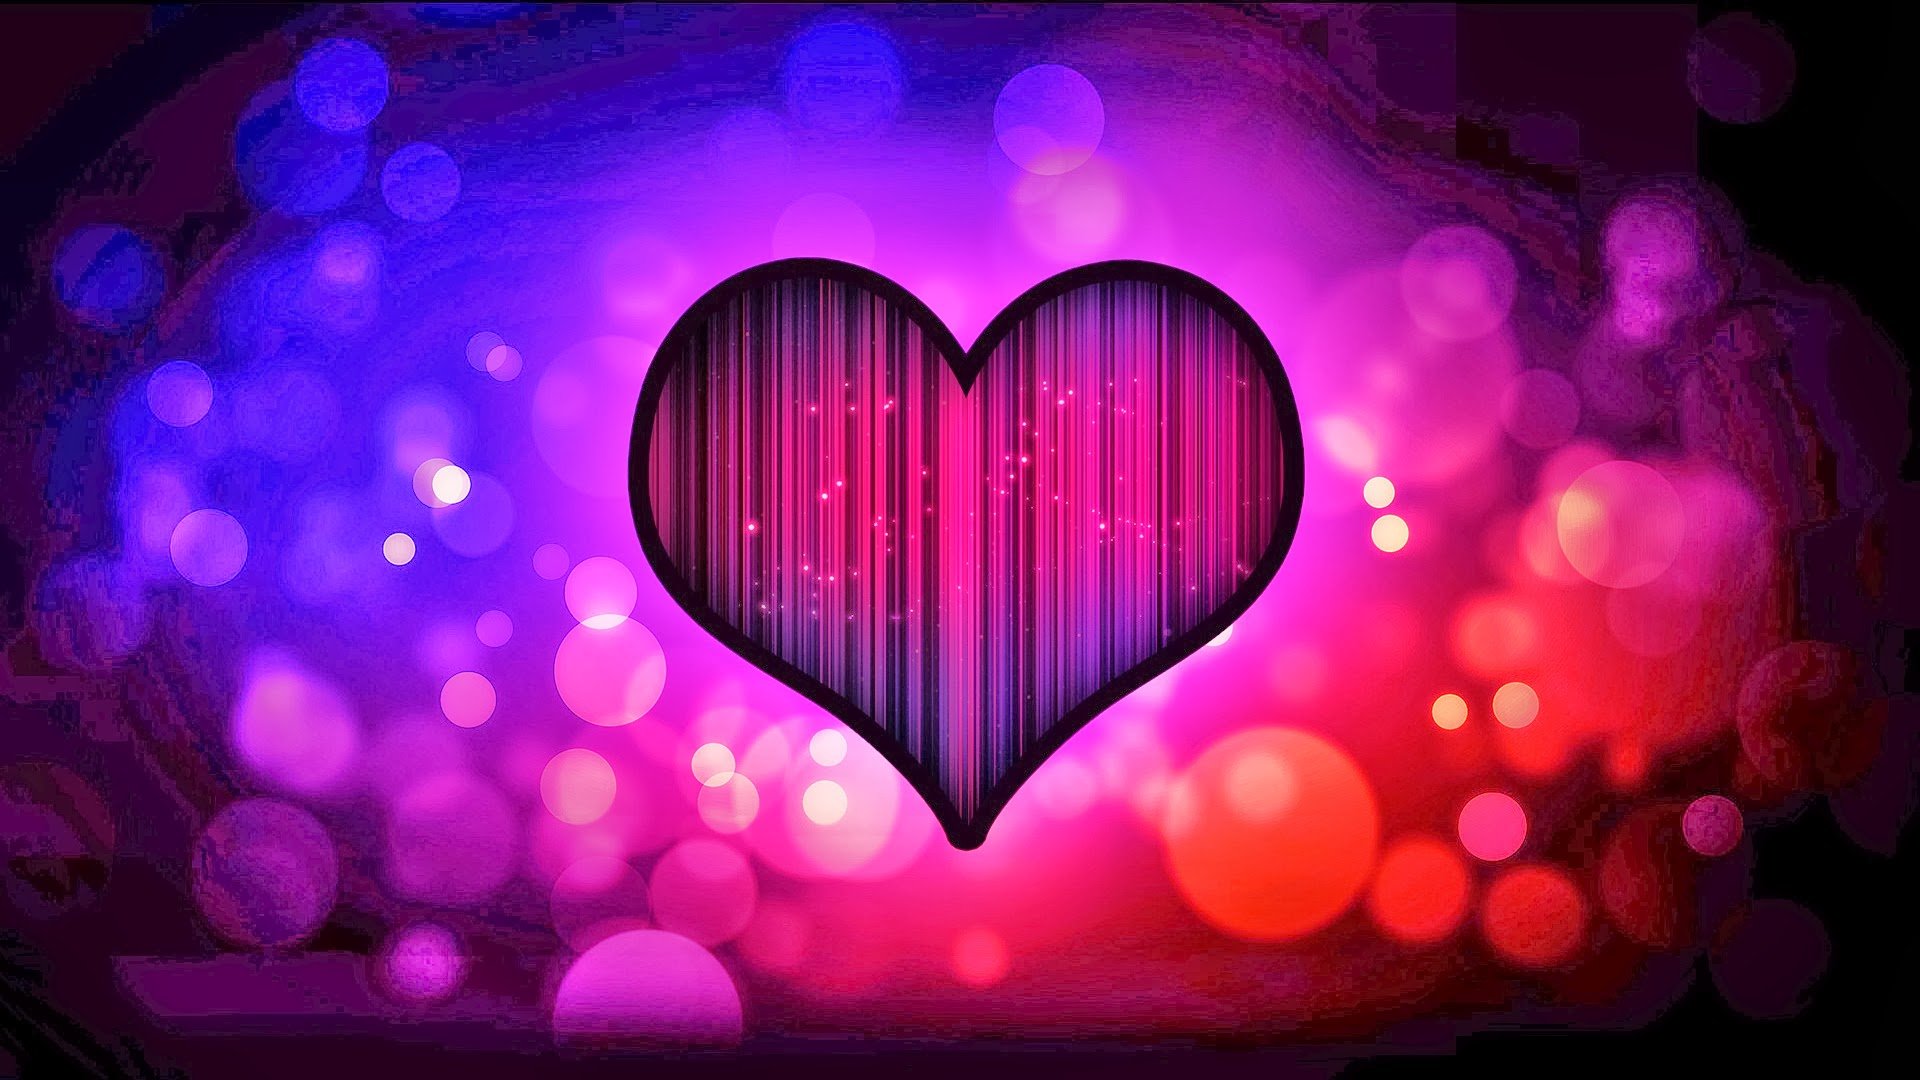 Love heart abstract hd wallpaper image photo picture